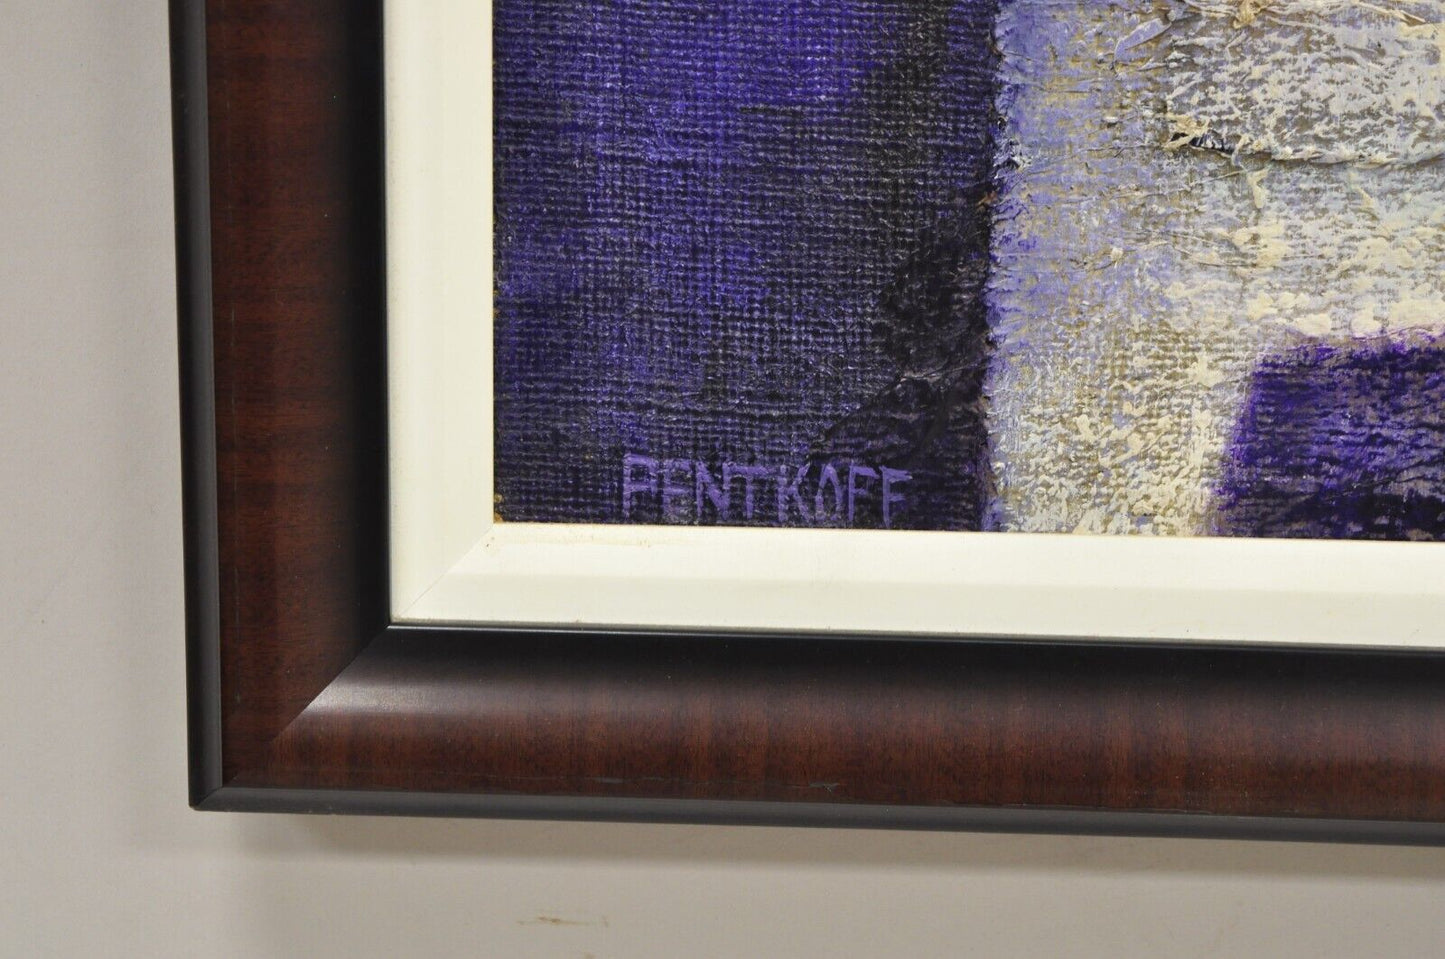 Modern Abstract Blue and Purple Acrylic on Canvas Large Painting Signed Pentkoff